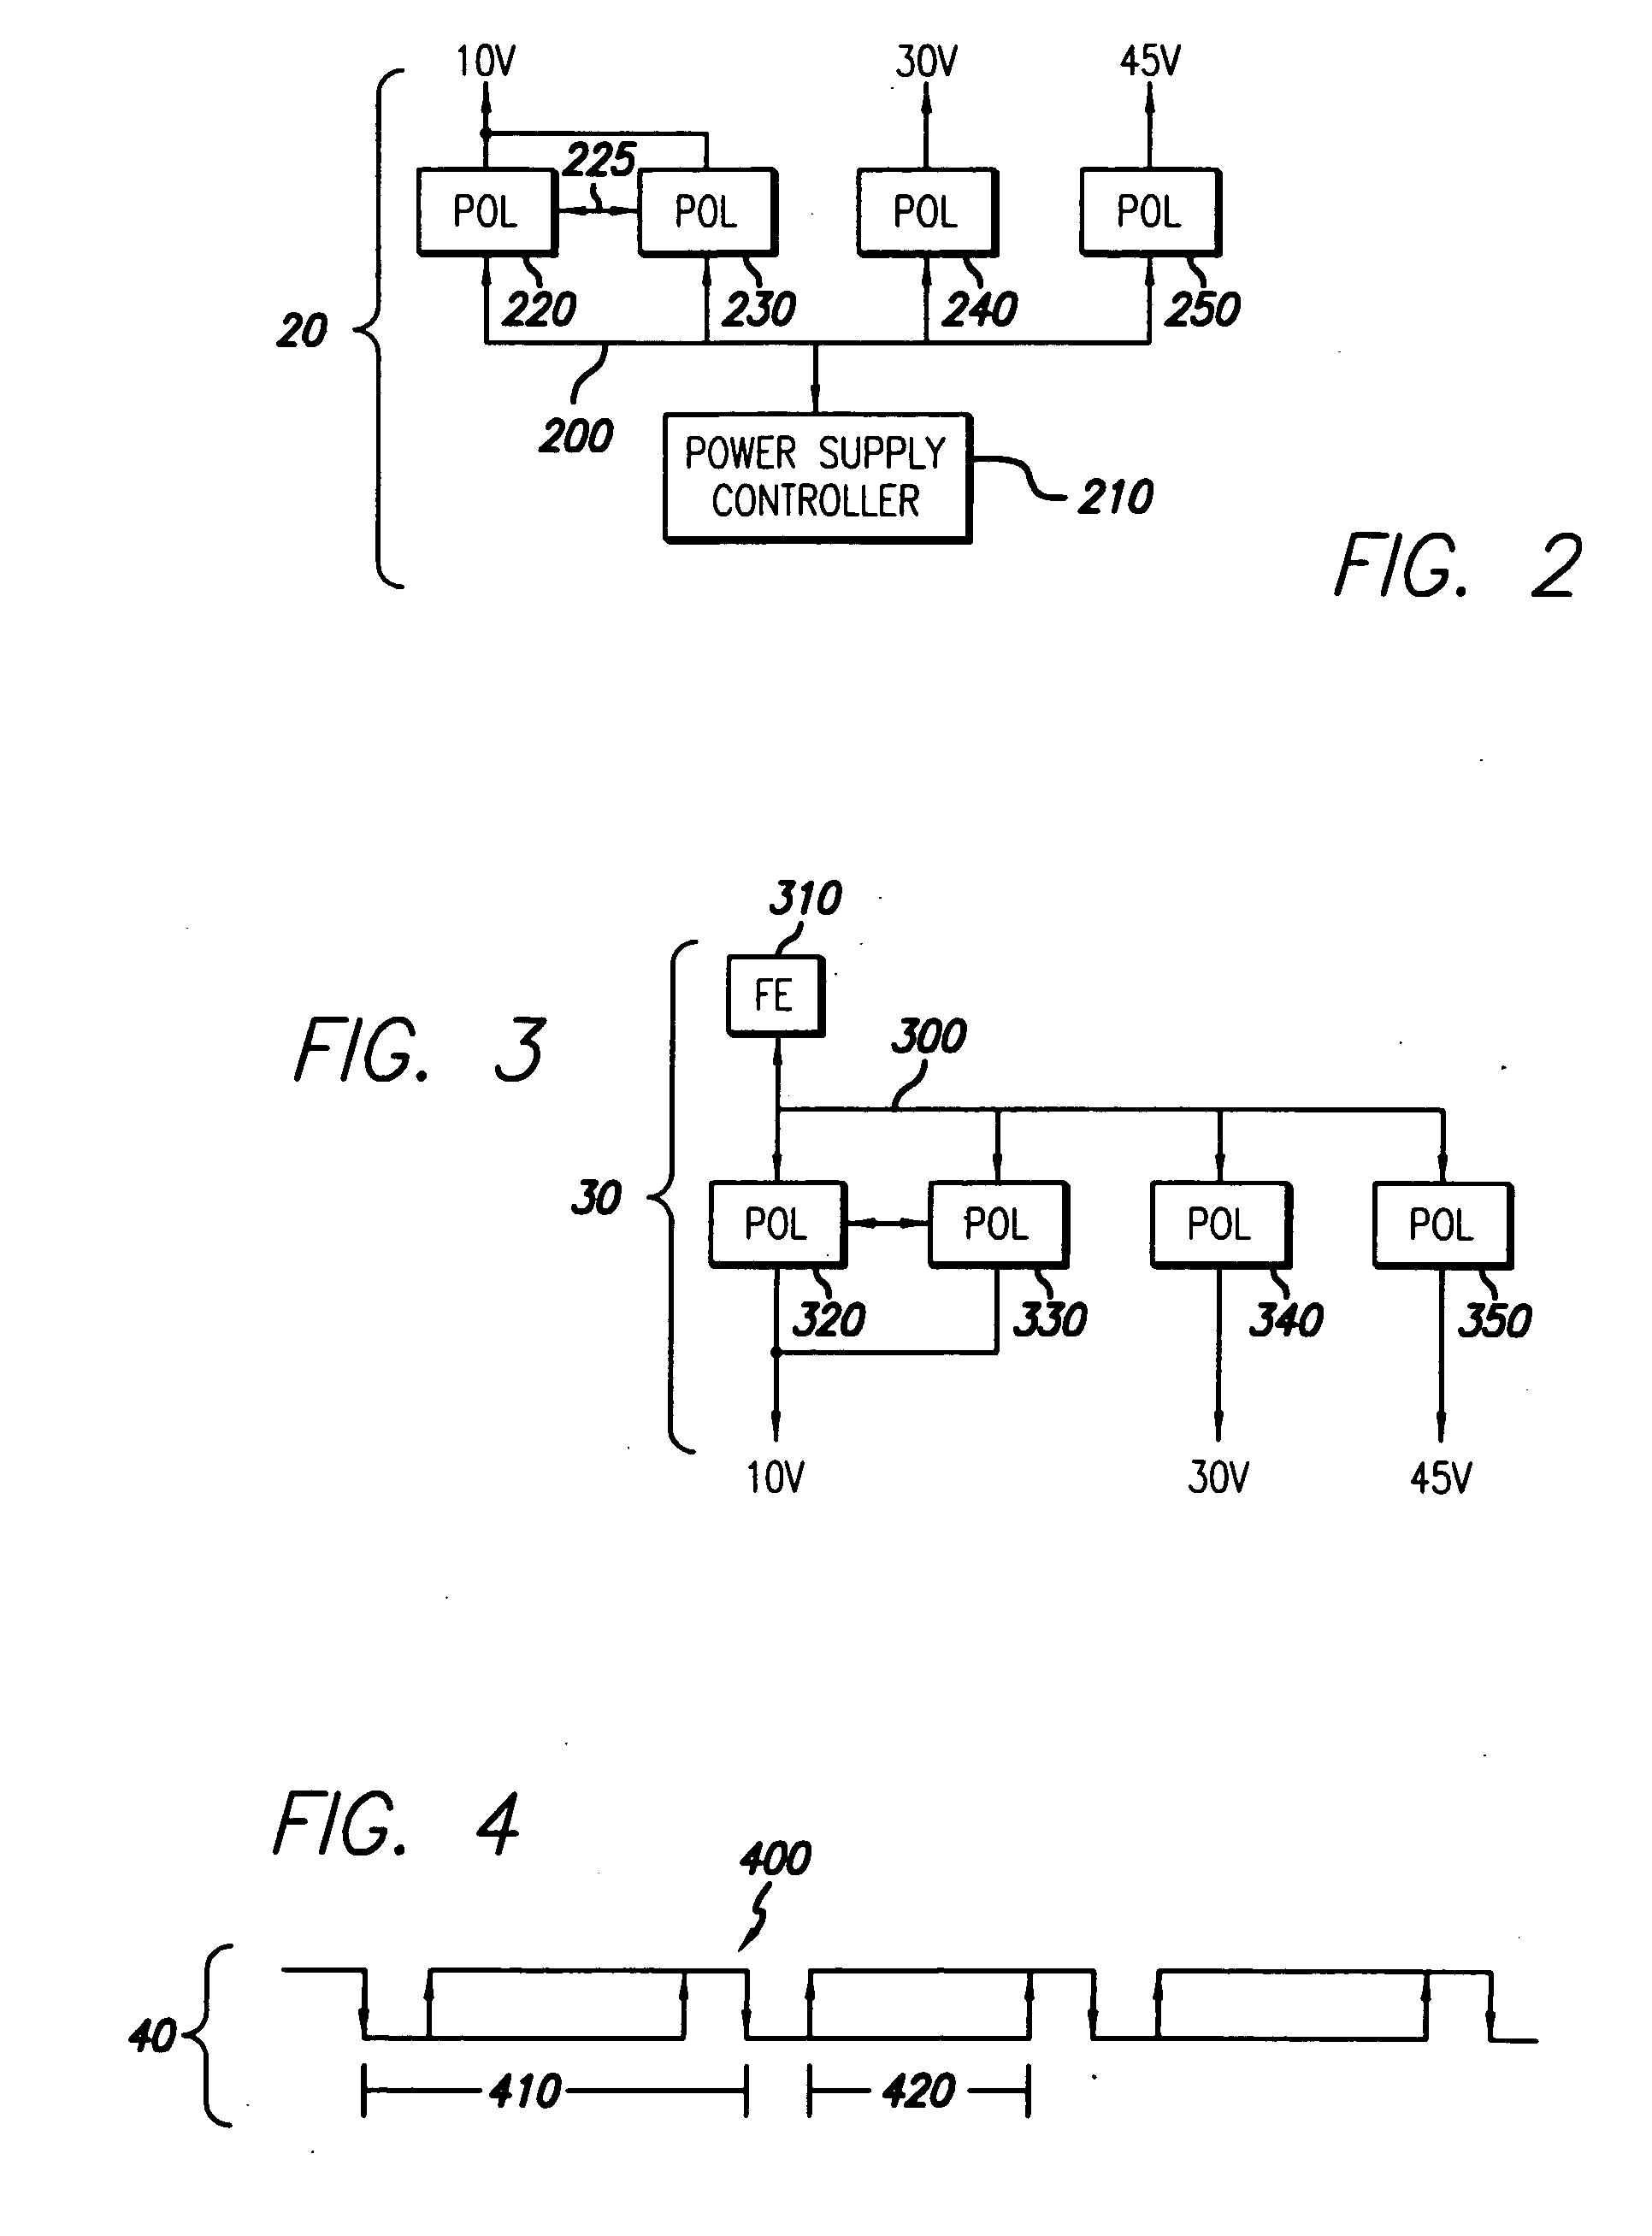 System and method for controlling a point-of-load regulator